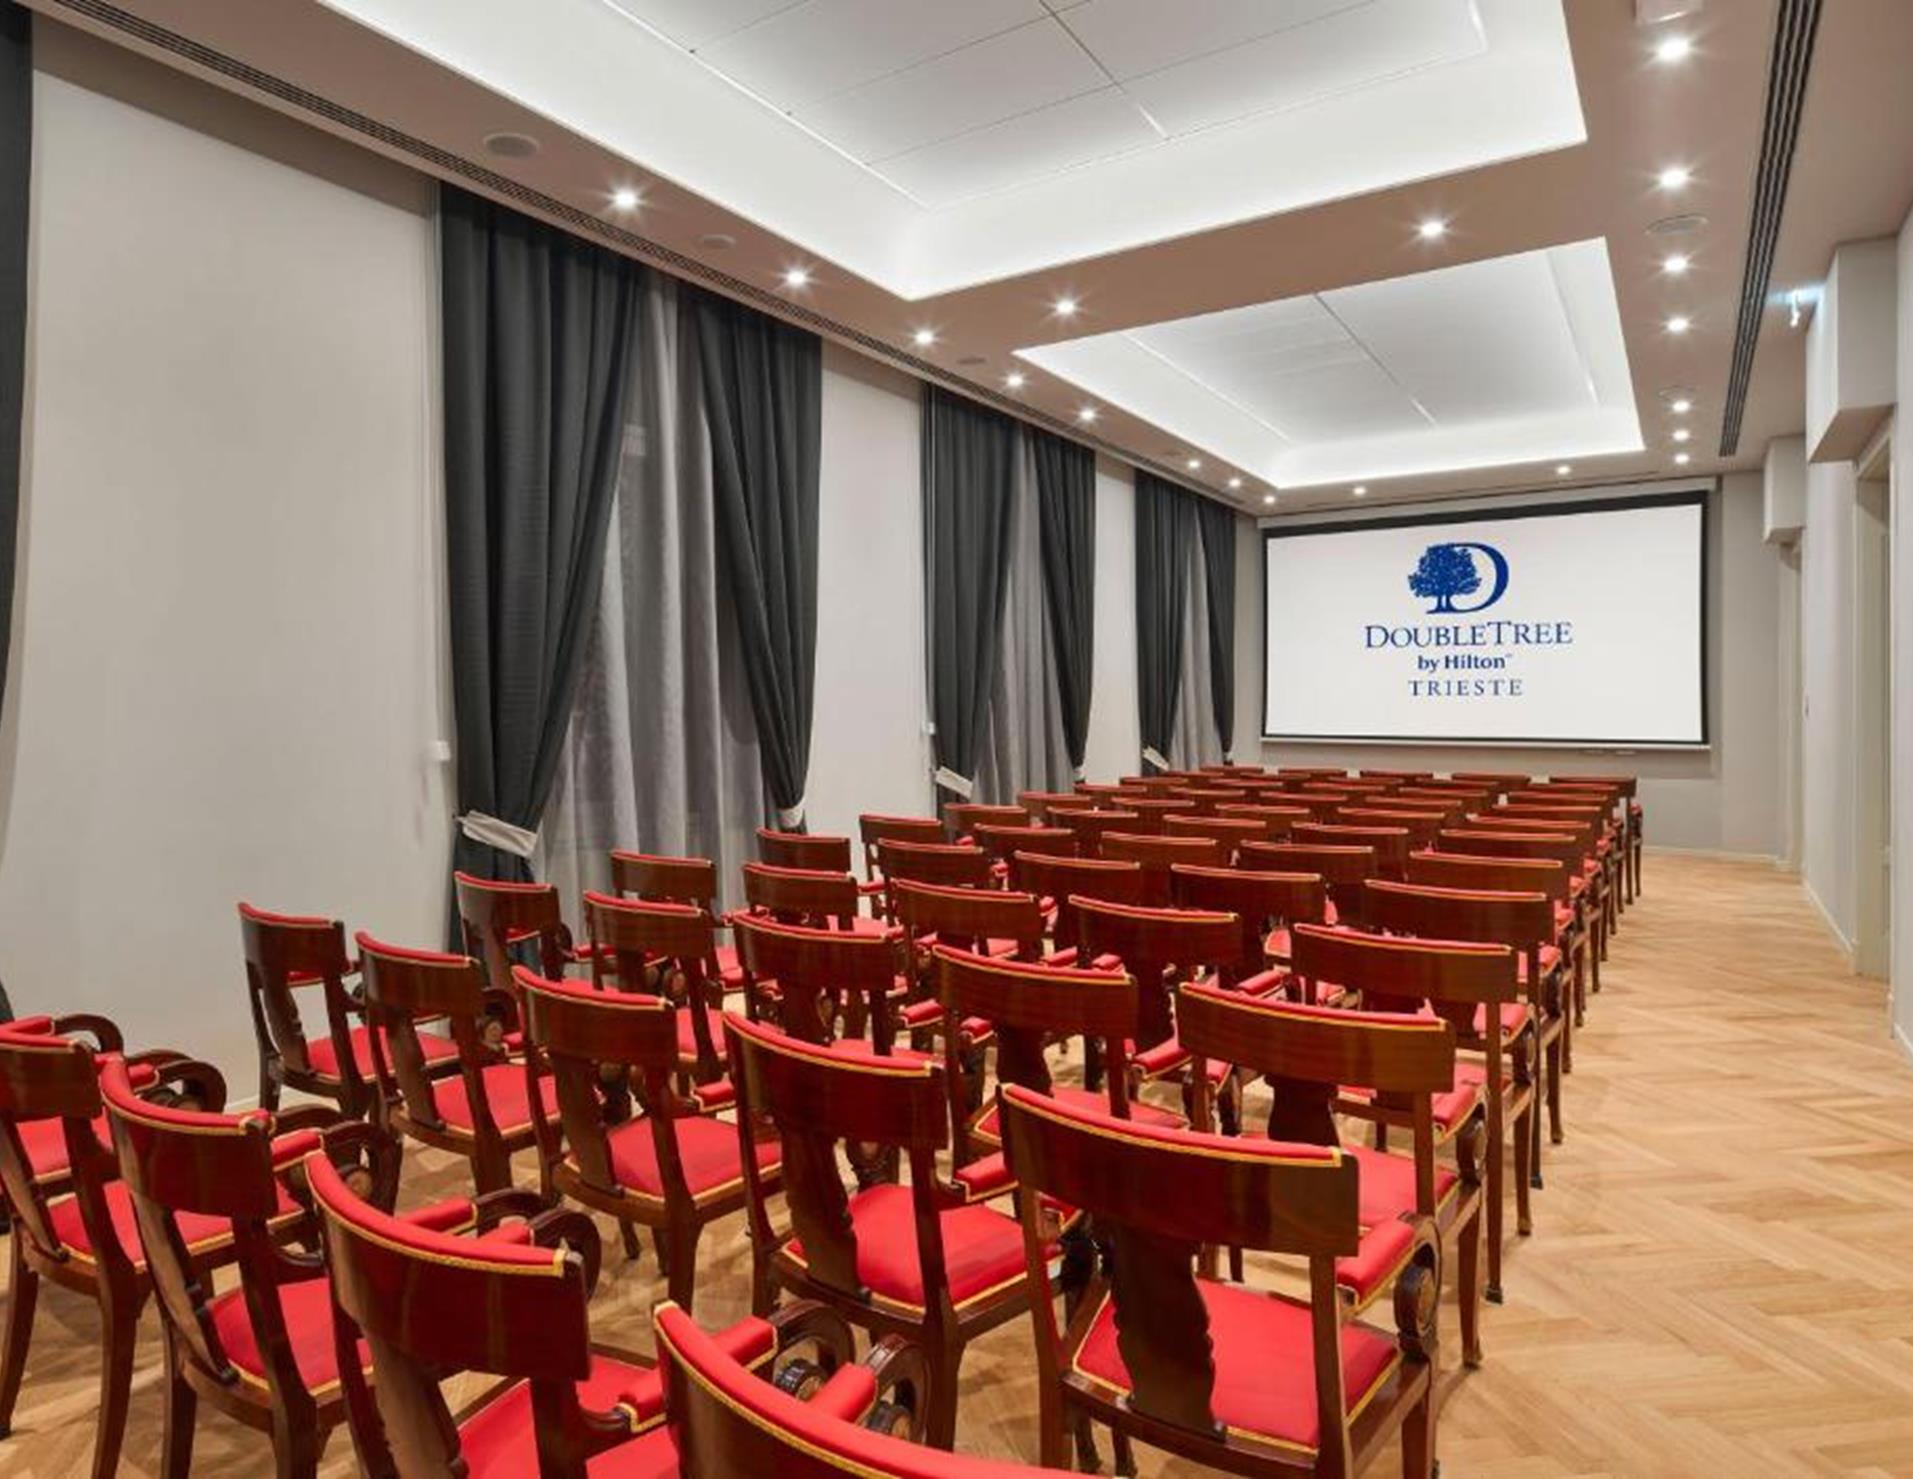 DoubleTree By Hilton Trieste - Conference Room